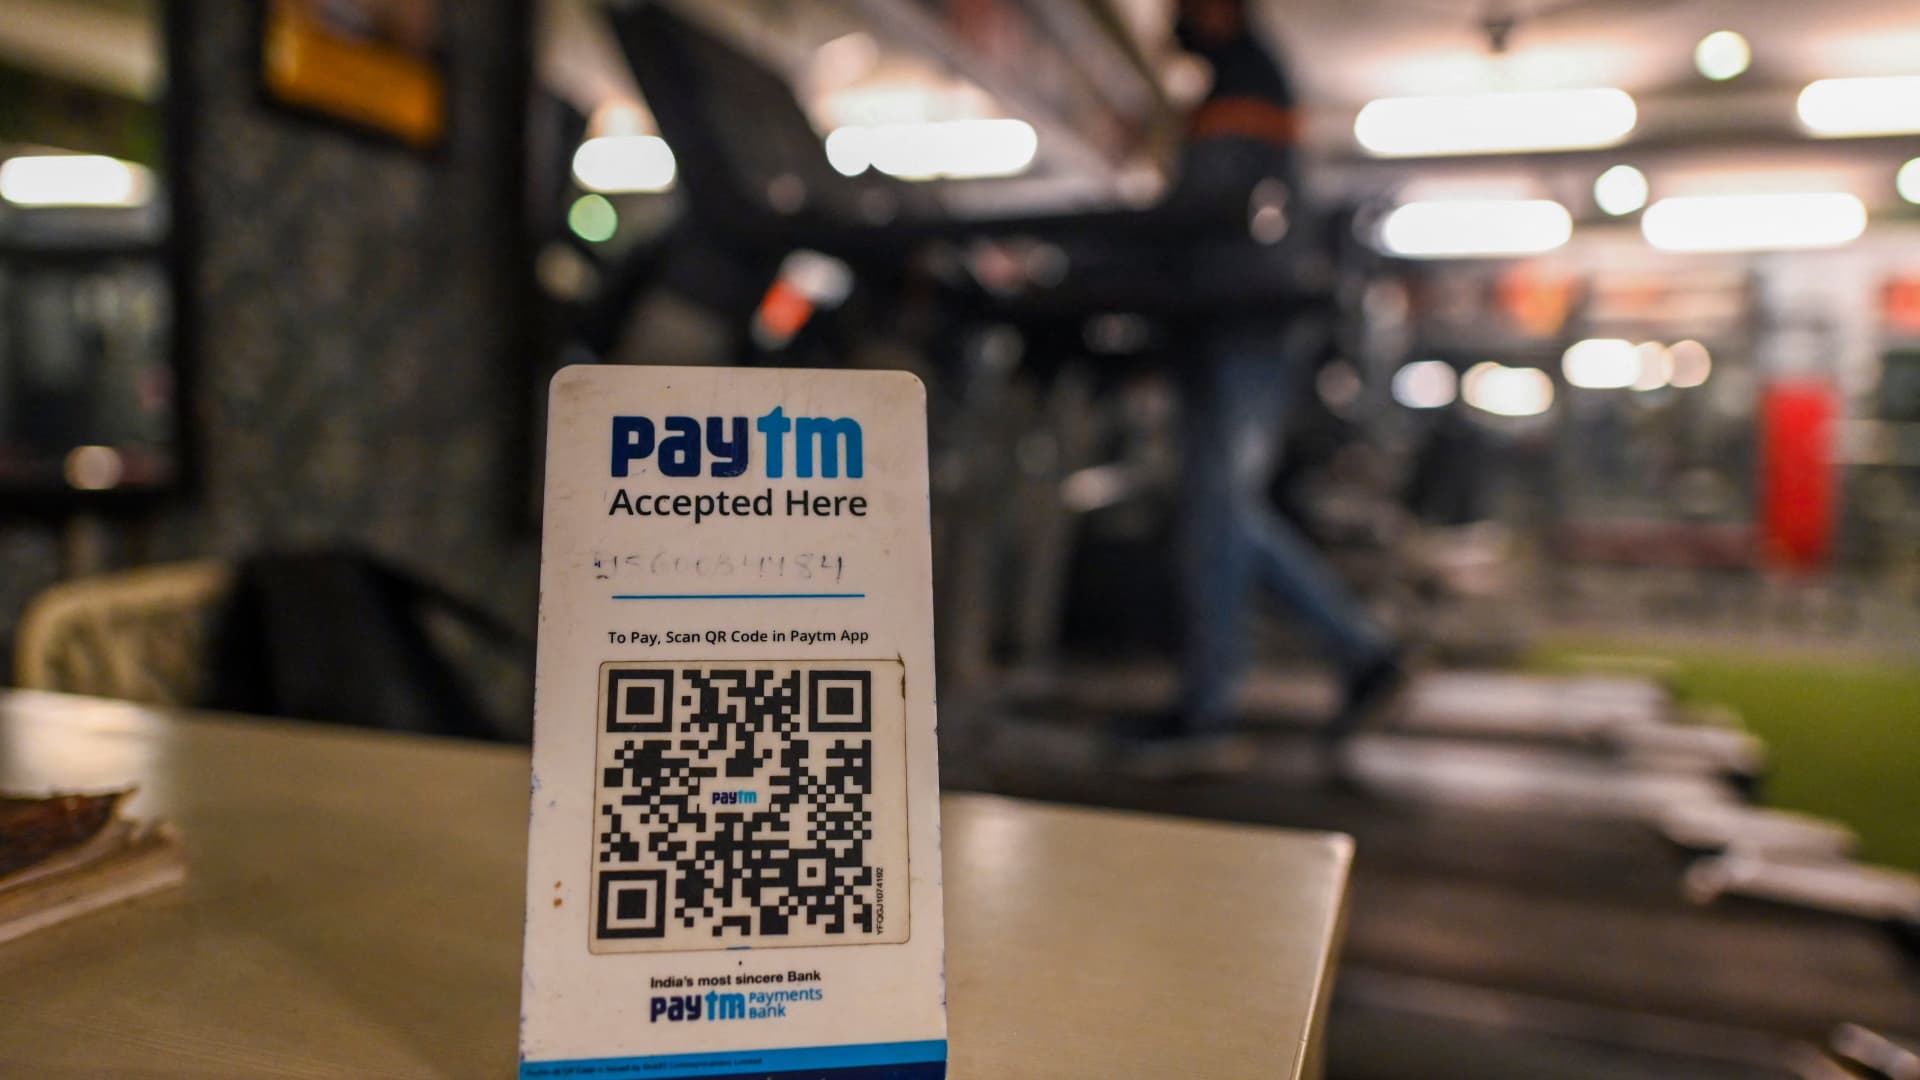 Crisis-hit Paytm in talks with top India officials after $2.5 billion market cap wipeout